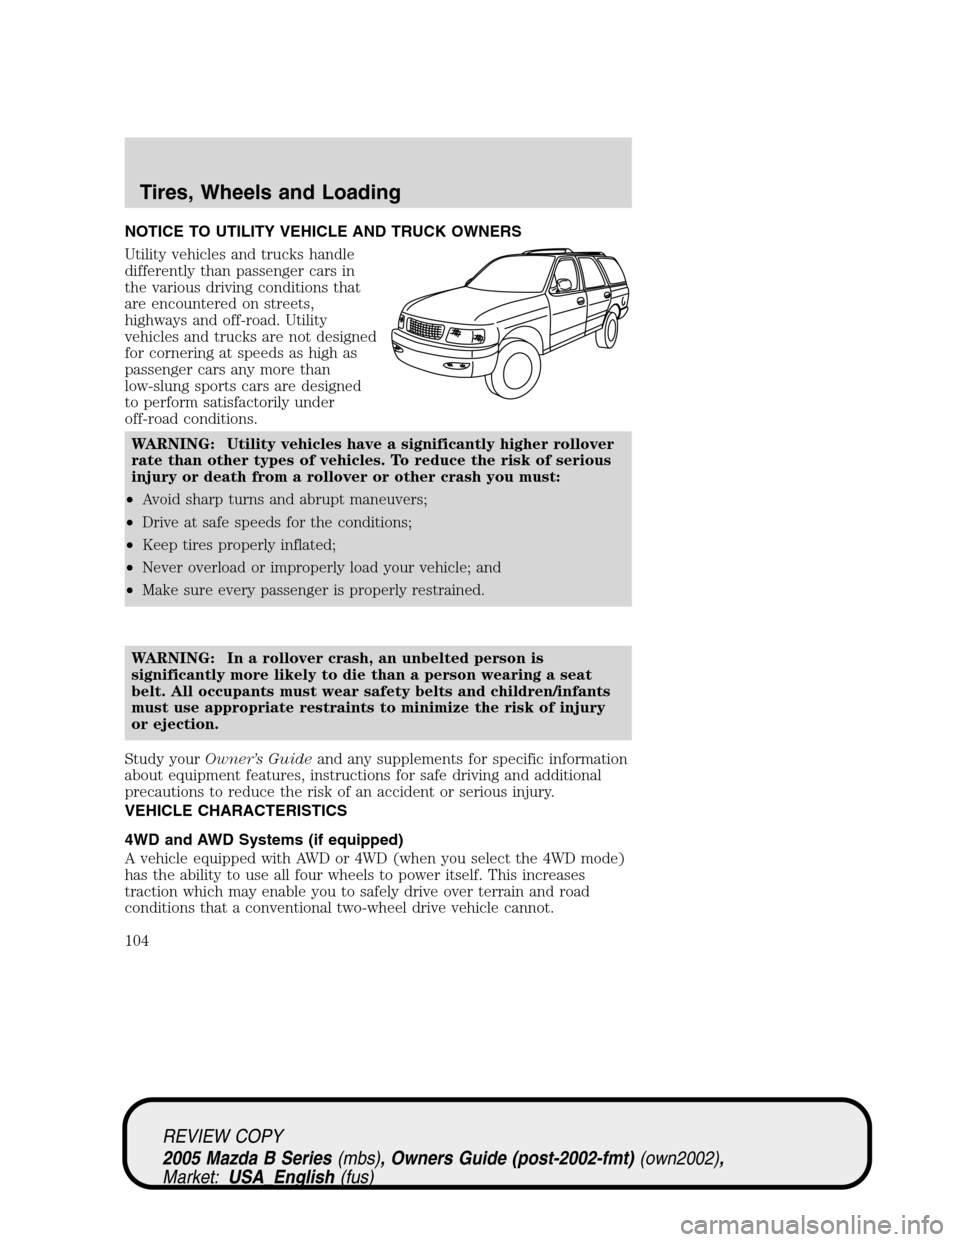 MAZDA MODEL B2300 TRUCK 2005  Owners Manual (in English) NOTICE TO UTILITY VEHICLE AND TRUCK OWNERS
Utility vehicles and trucks handle
differently than passenger cars in
the various driving conditions that
are encountered on streets,
highways and off-road. 